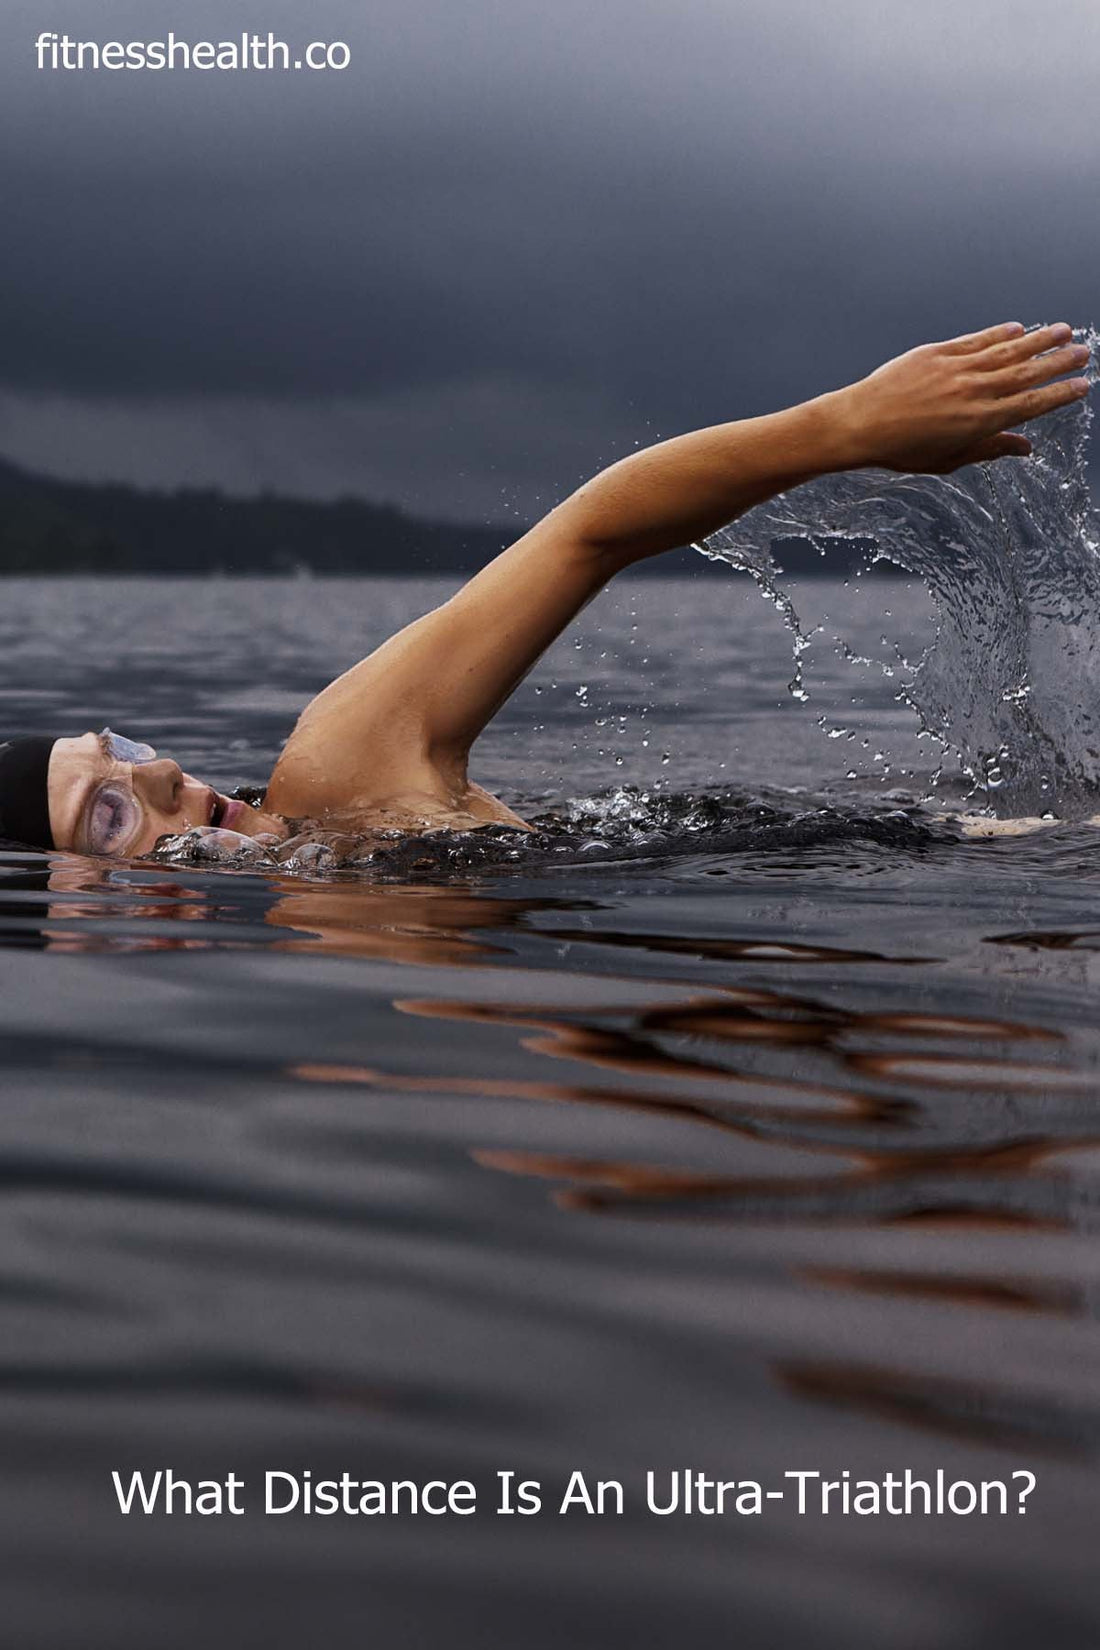 What Distance Is An Ultra-Triathlon? - Fitness Health 